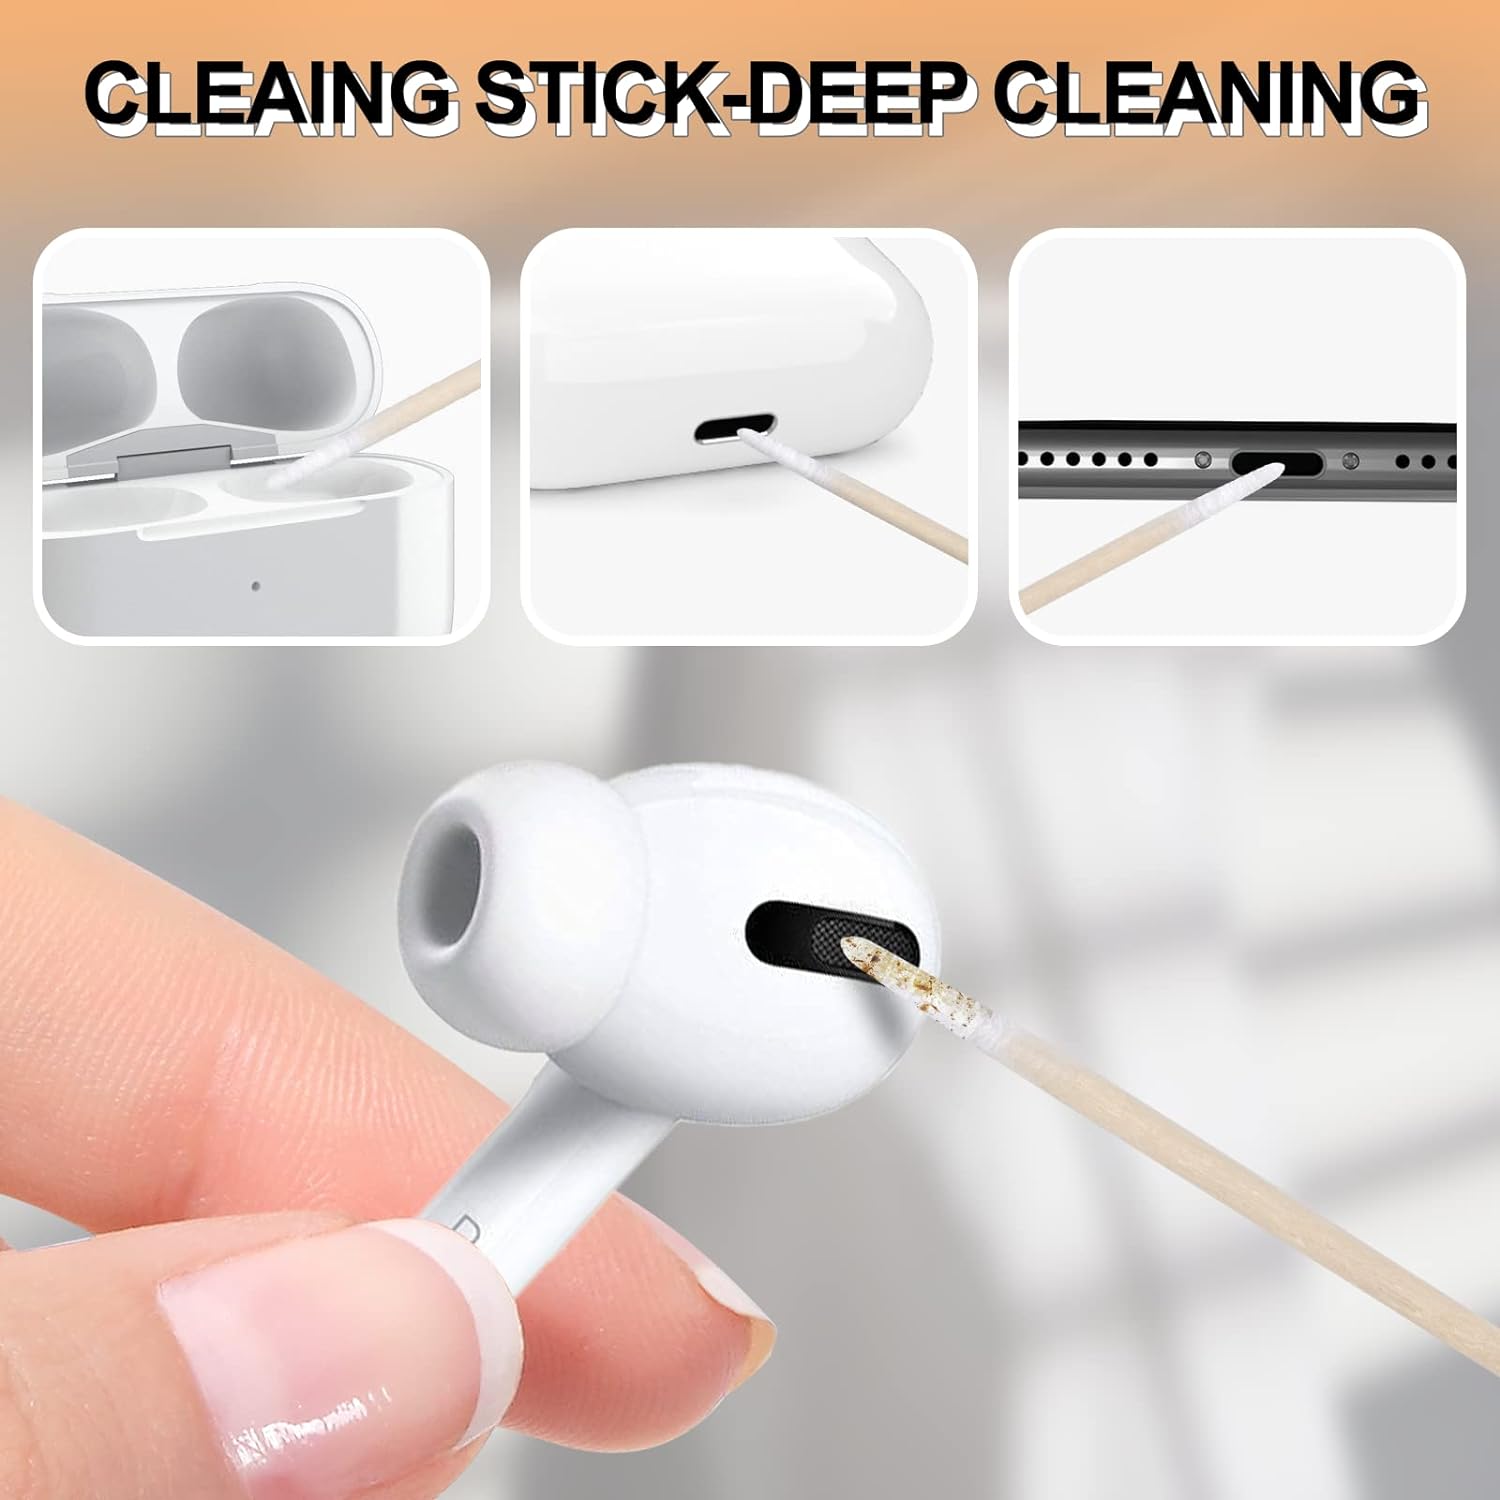 MOLOPPO Cleaning Putty for Apple Airpods, Phone Cleaning Kit with Clean Pen, Remove Ear Wax&Dirt&Gunk from Device’s Small Crevices, AirPod Cleaner Kit for Airpods Charging Case/Headphones/Electronics